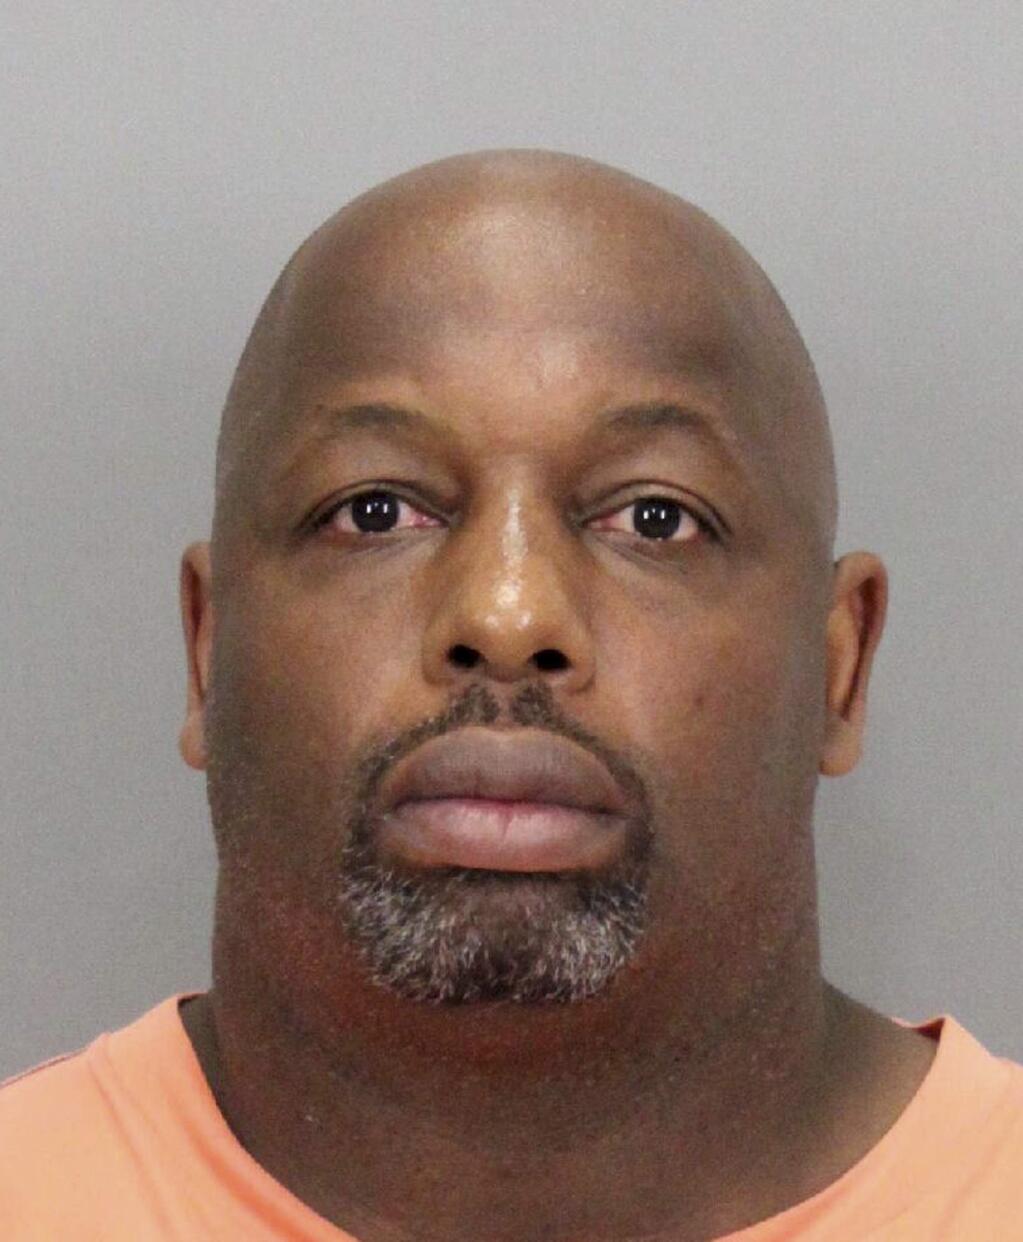 In this undated booking photo released by the Santa Clara County District Attorney is former NFL football player Dana Stubblefield. Prosecutors say they have charged former San Francisco 49er Dana Stubblefield with the rape of a 'developmentally delayed' woman. The Santa Clara County District Attorney's Office says the 45-year-old Stubblefield was charged Monday, May 2, 2016, with sexually assaulting the woman last year at his Morgan Hill home. (Santa Clara County District Attorney via AP)